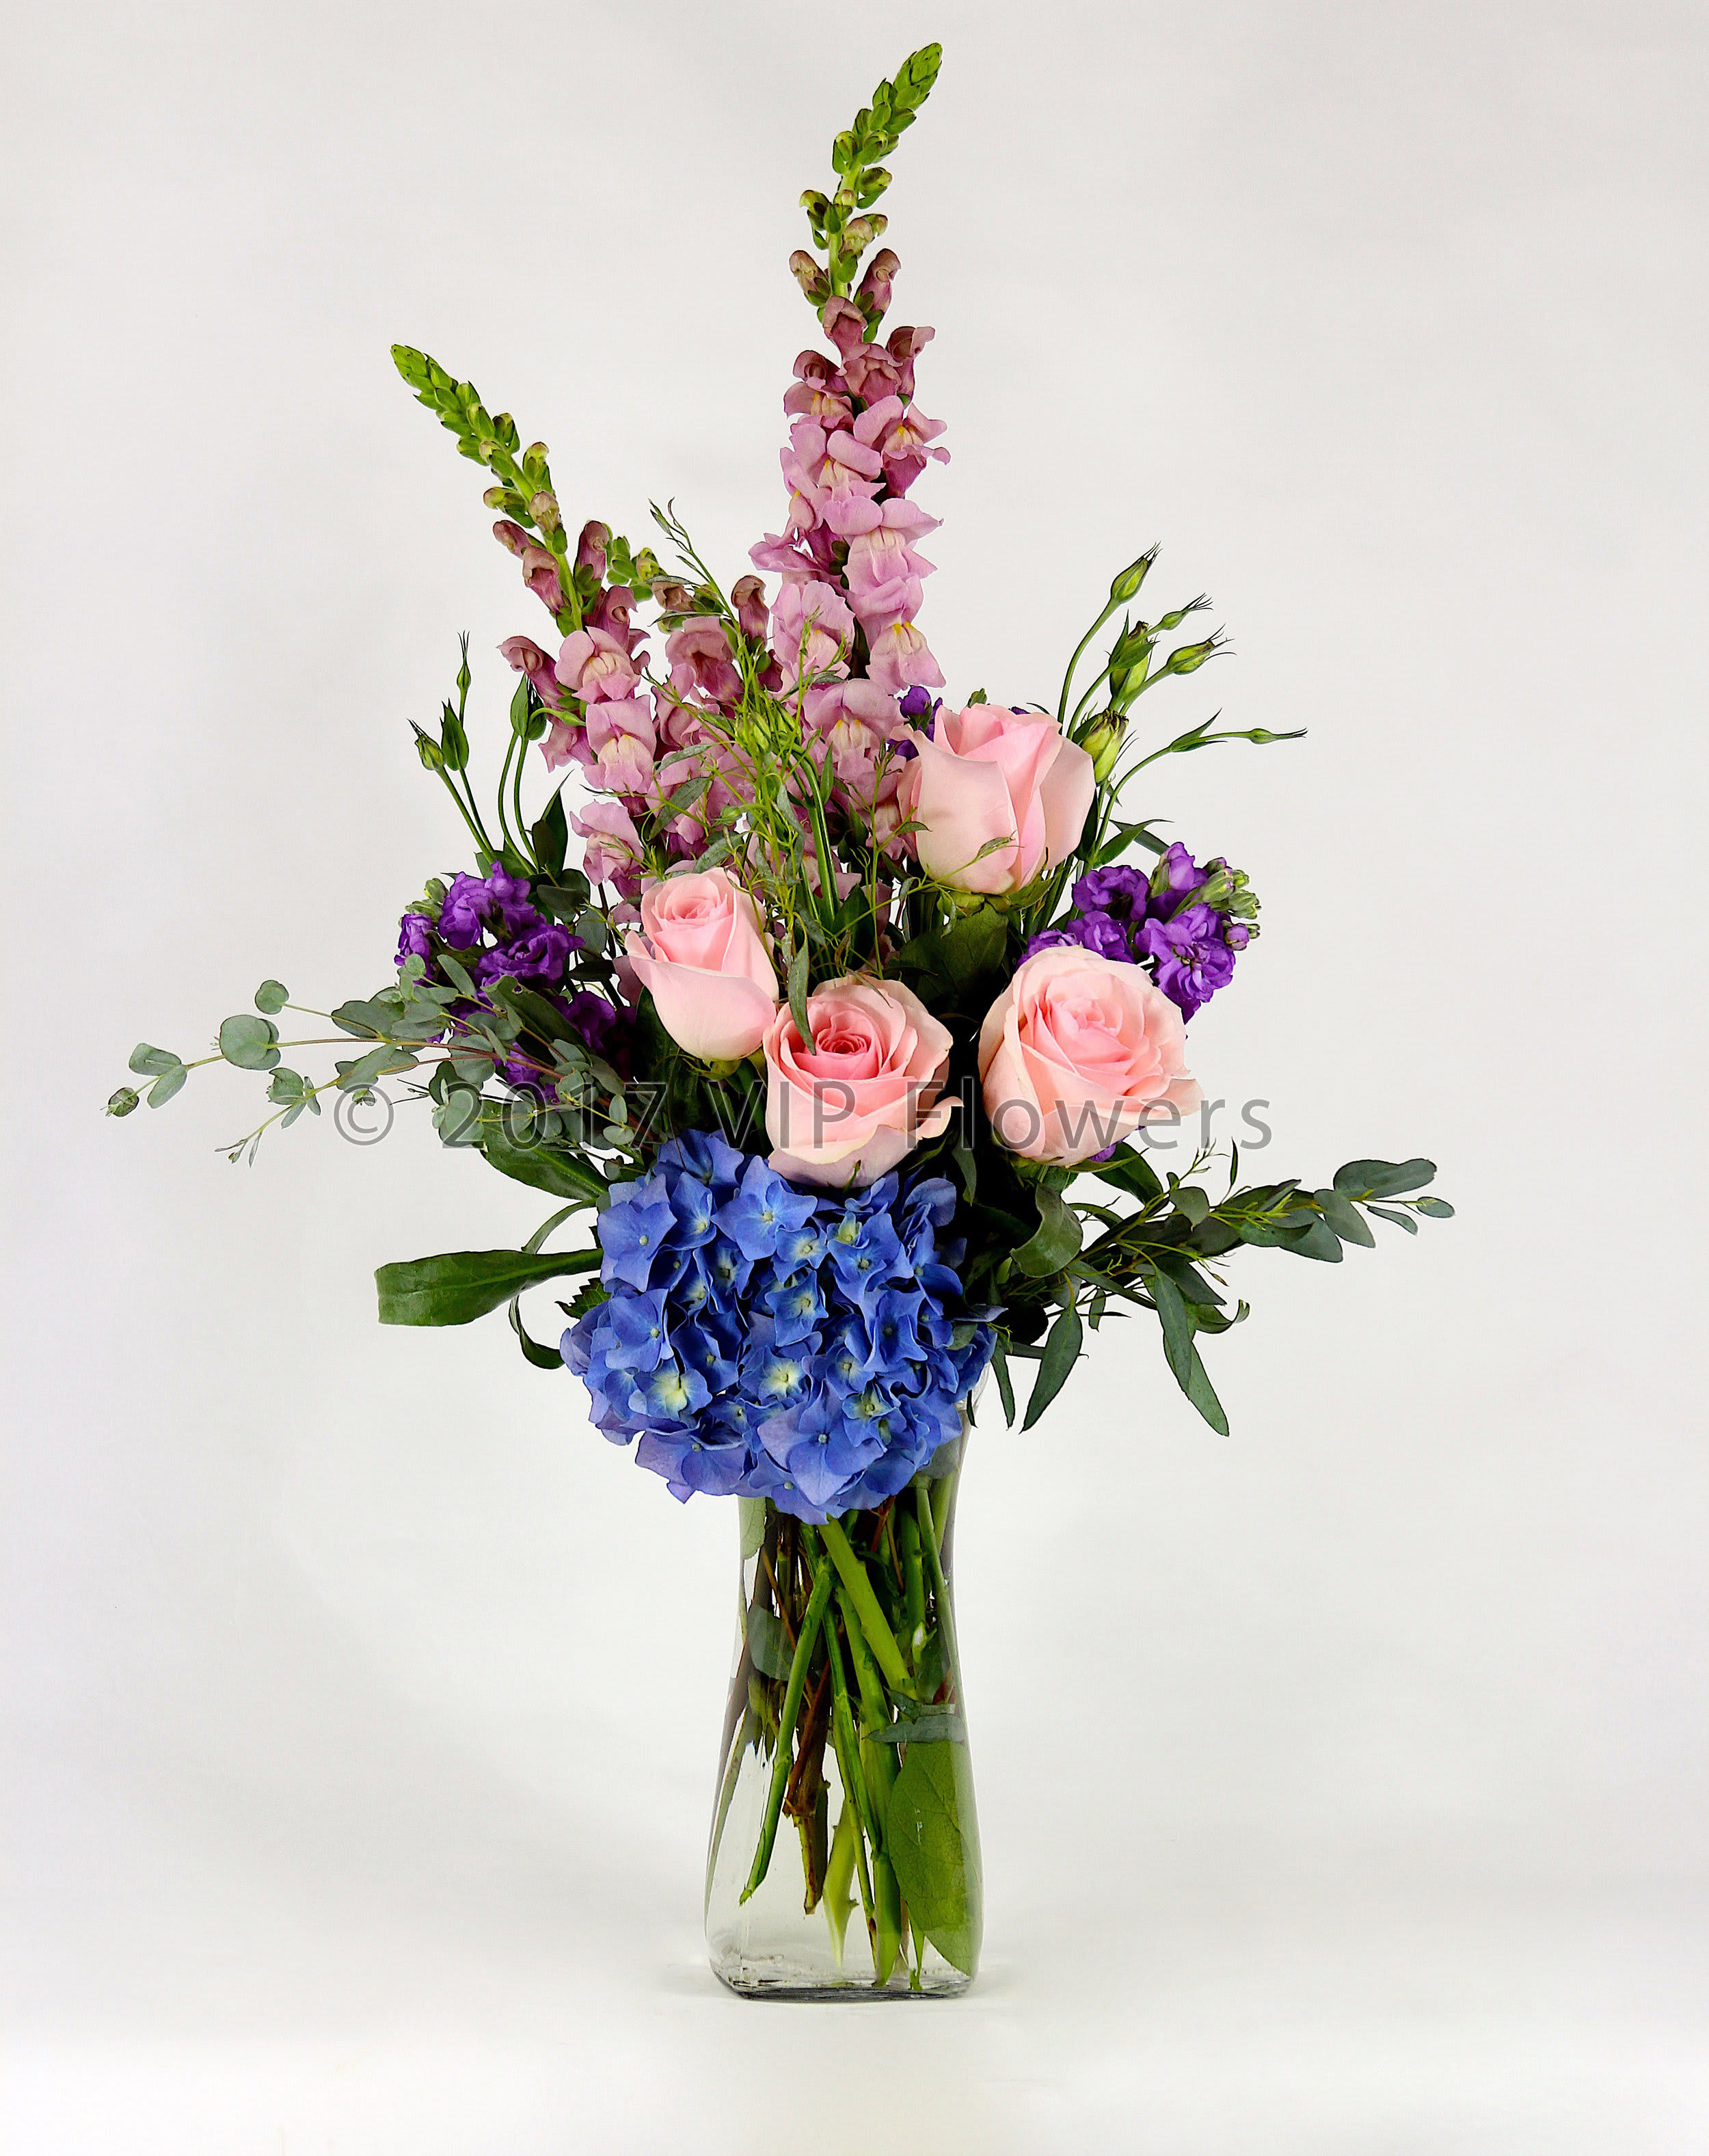 Blue Pin - Flowers Included:  Pink Roses Blue Hydrangea Pink Snapdragons Purple Stock Seasonal Greens       Substitutions may be necessary to ensure your arrangement or specialty gift is delivered in a timely manner. The utmost care and attention is given to your order to ensure that it is as similar as possible to the requested item (Please note that some flowers and colors may vary due to seasonality.)